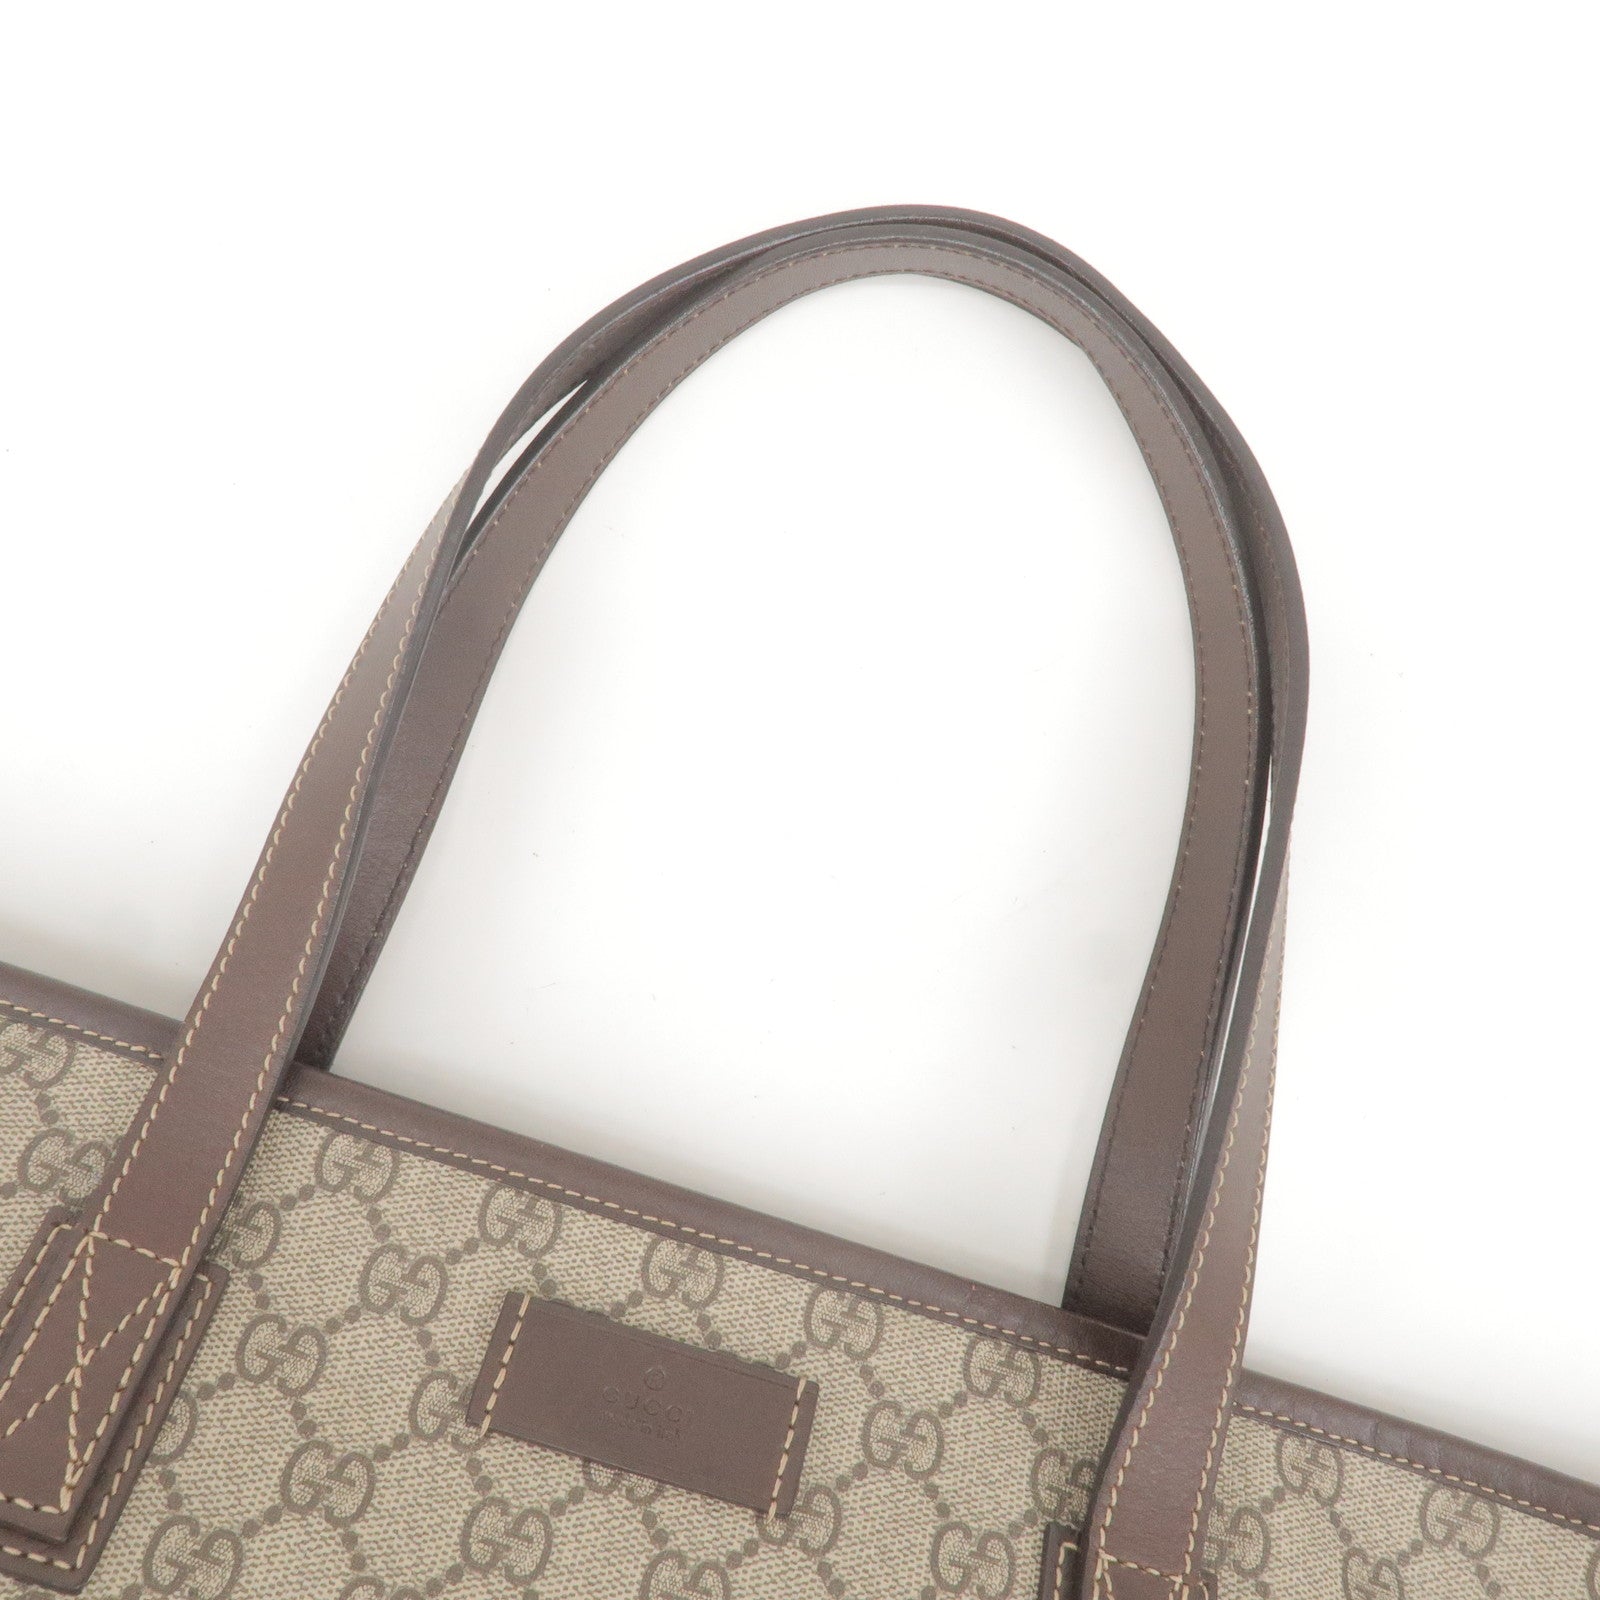 GUCCI-GG-Supreme-Leather-Tote-Bag-Beige-Brown-211138 – dct-ep_vintage luxury  Store